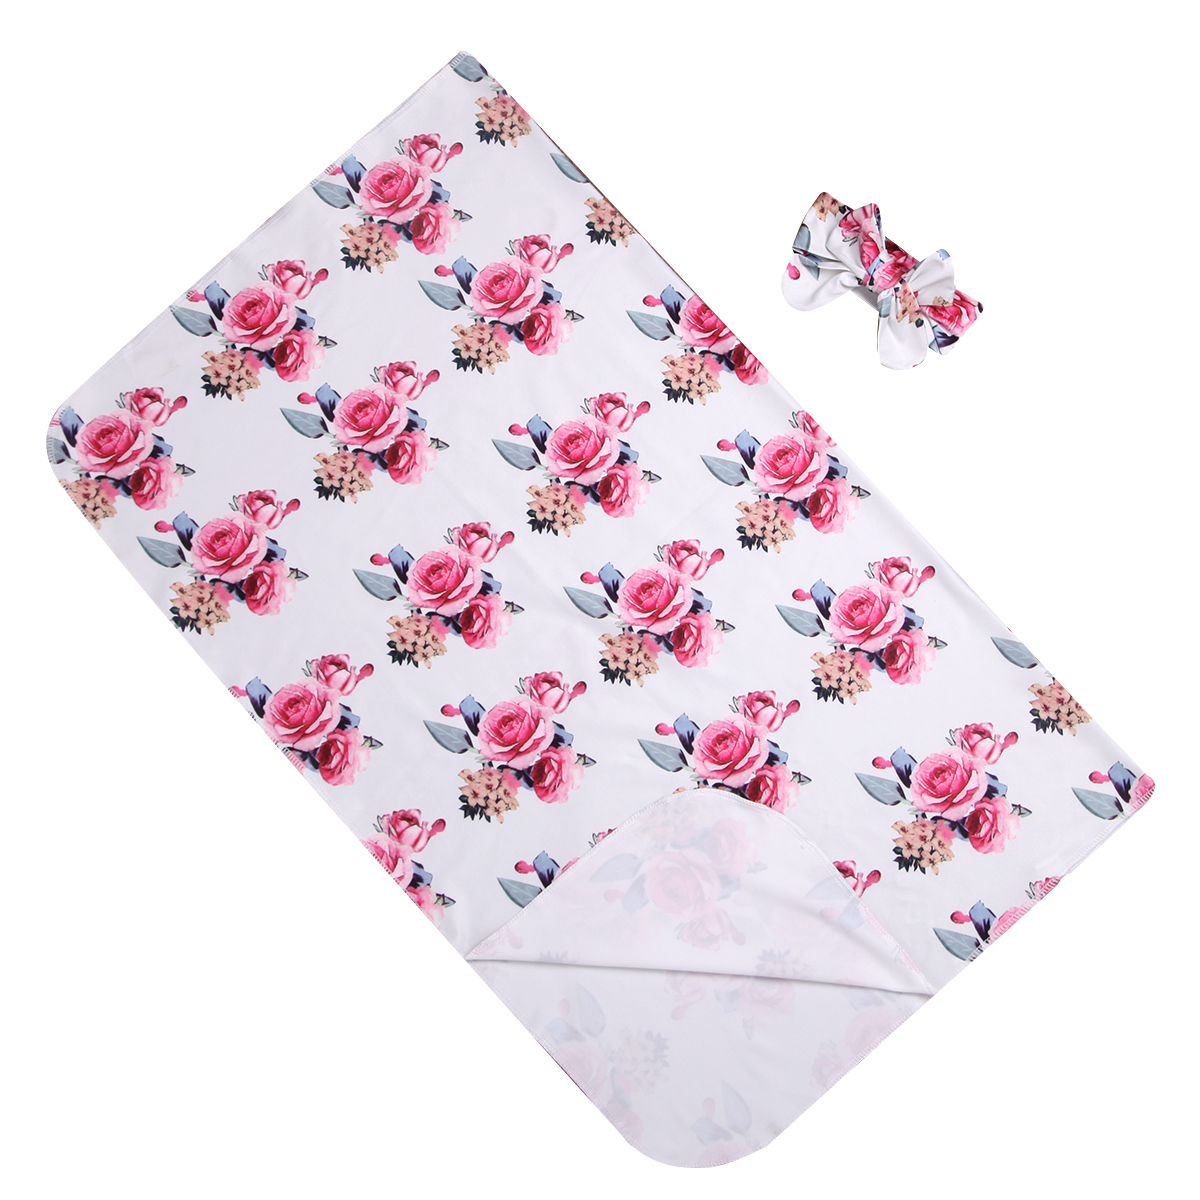 2-piece Baby Floral Print Photography Prop Blanket and Hairband Set